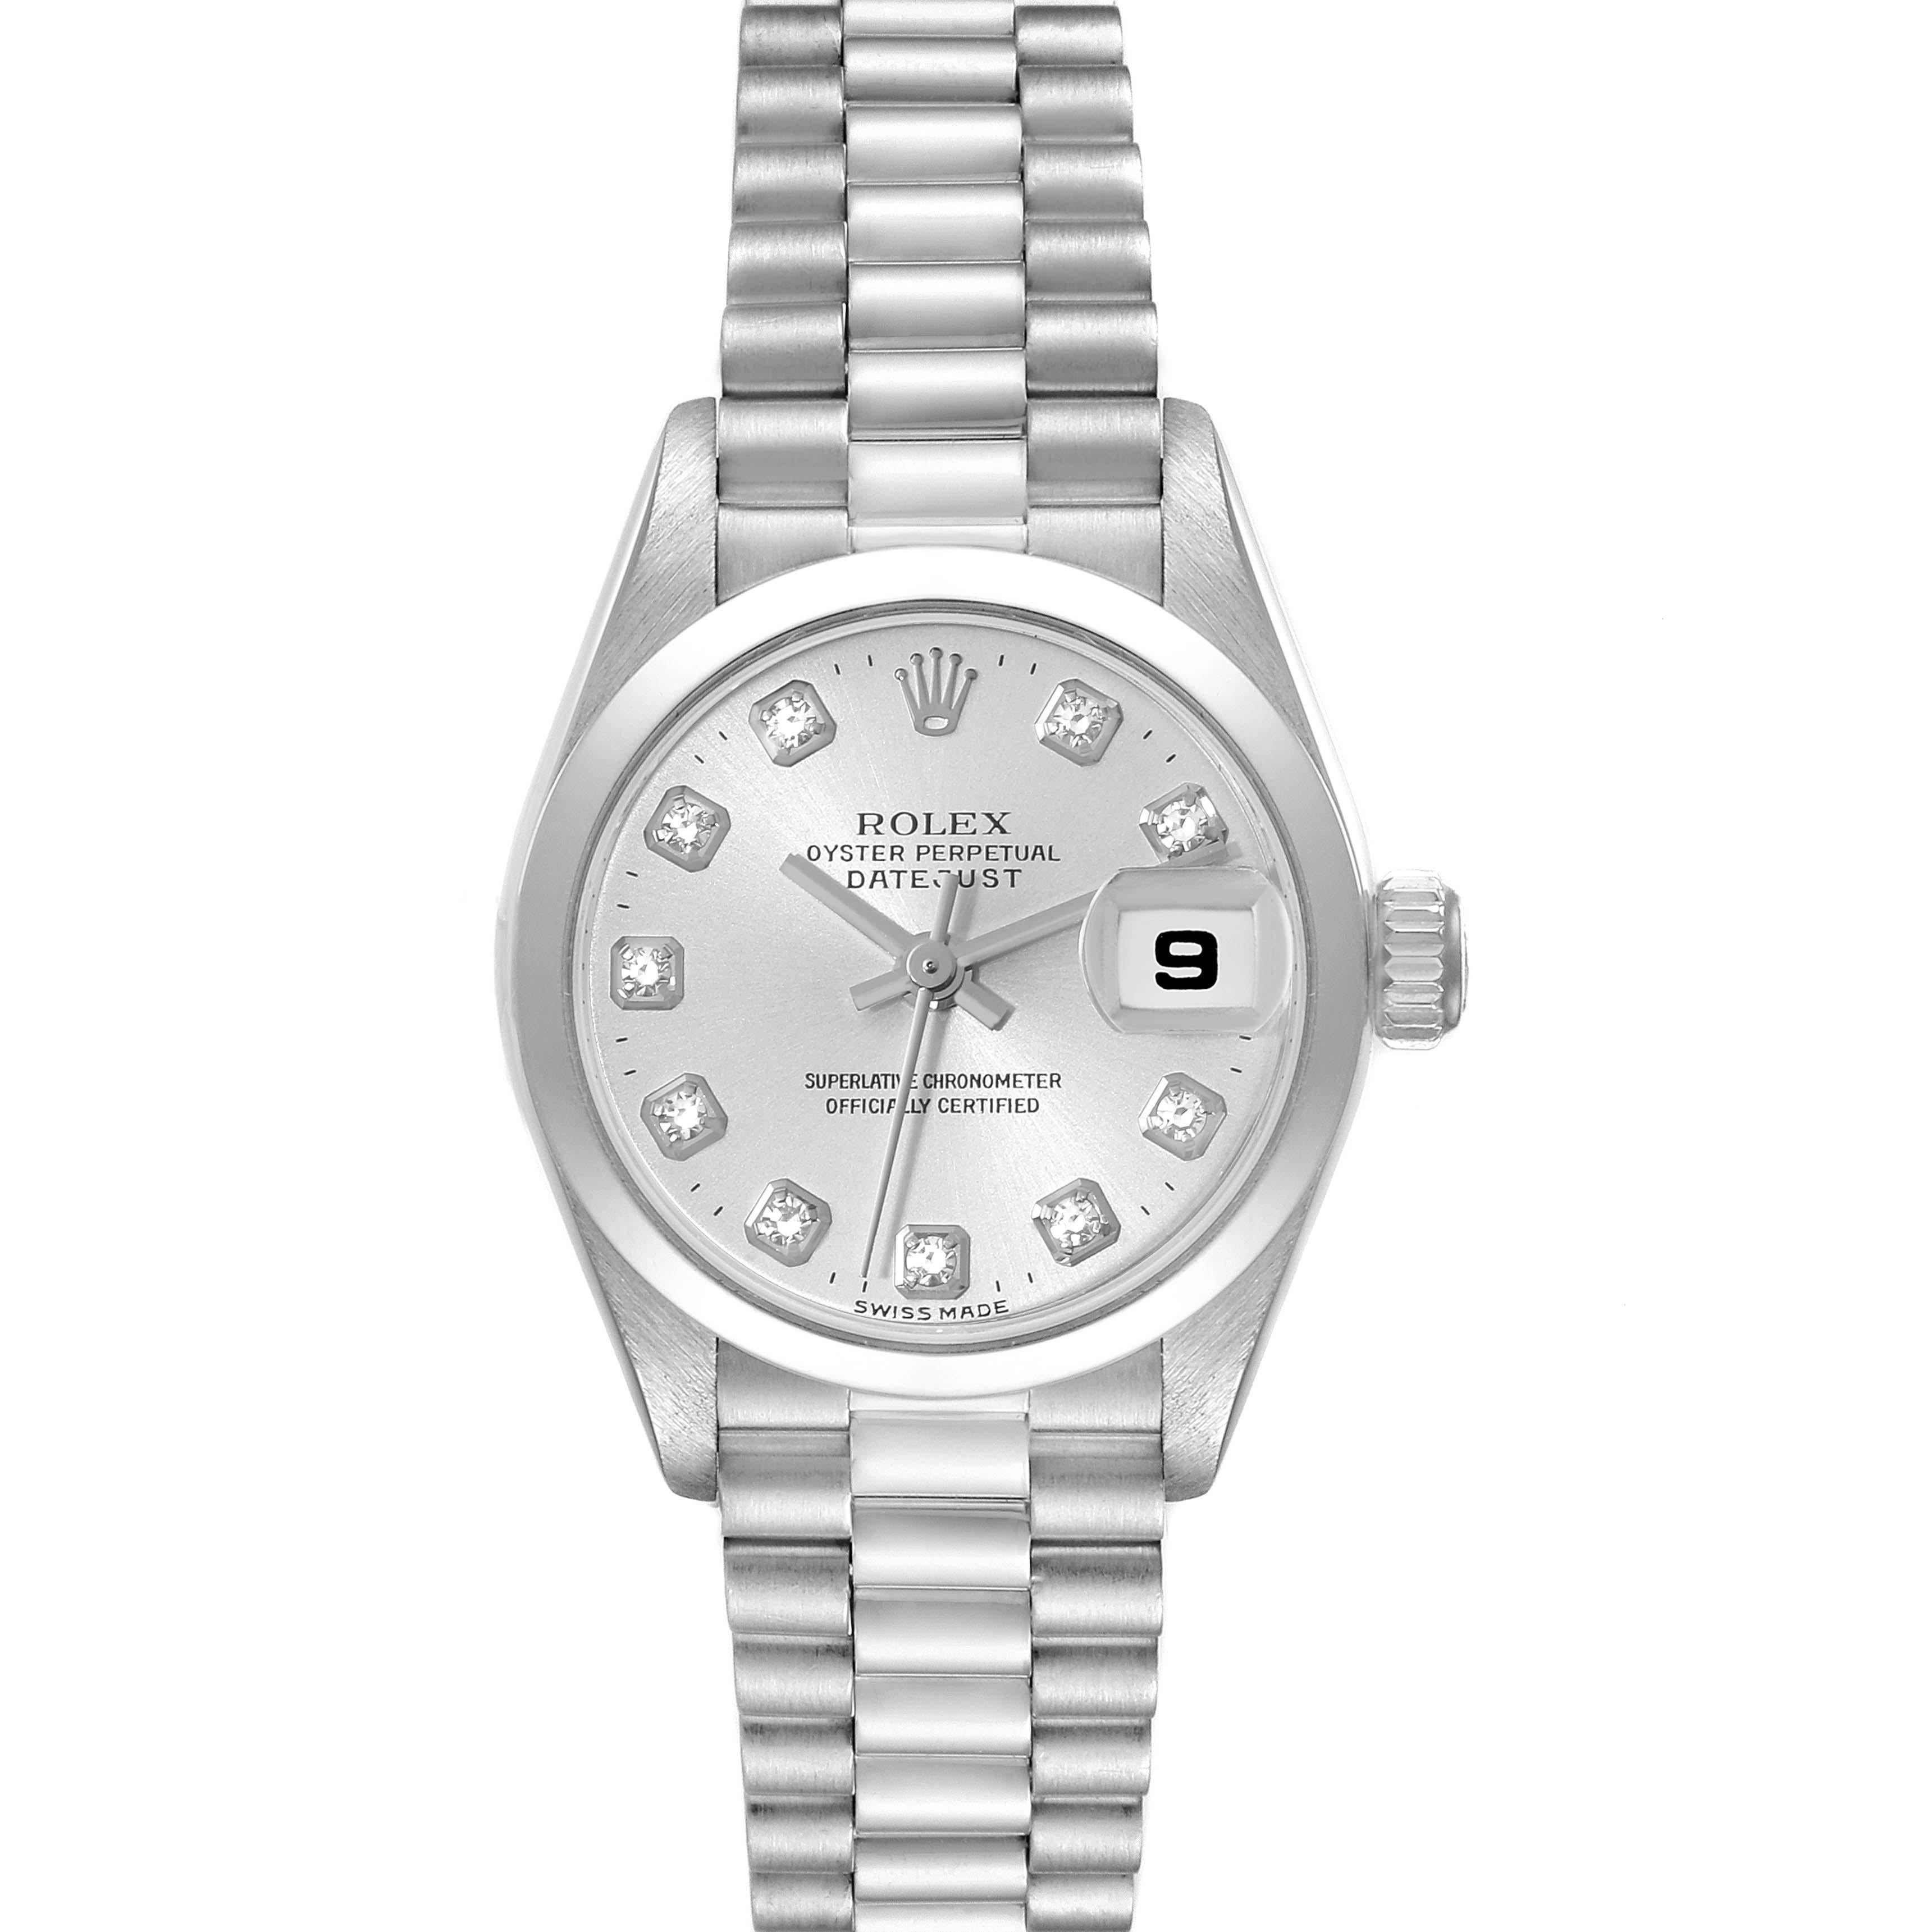 Rolex President Ladies Platinum Silver Diamond Dial Ladies Watch 179166. Officially certified chronometer self-winding movement. Platinum oyster case 26.0 mm in diameter. Rolex logo on a crown. Platinum smooth bezel. Scratch resistant sapphire